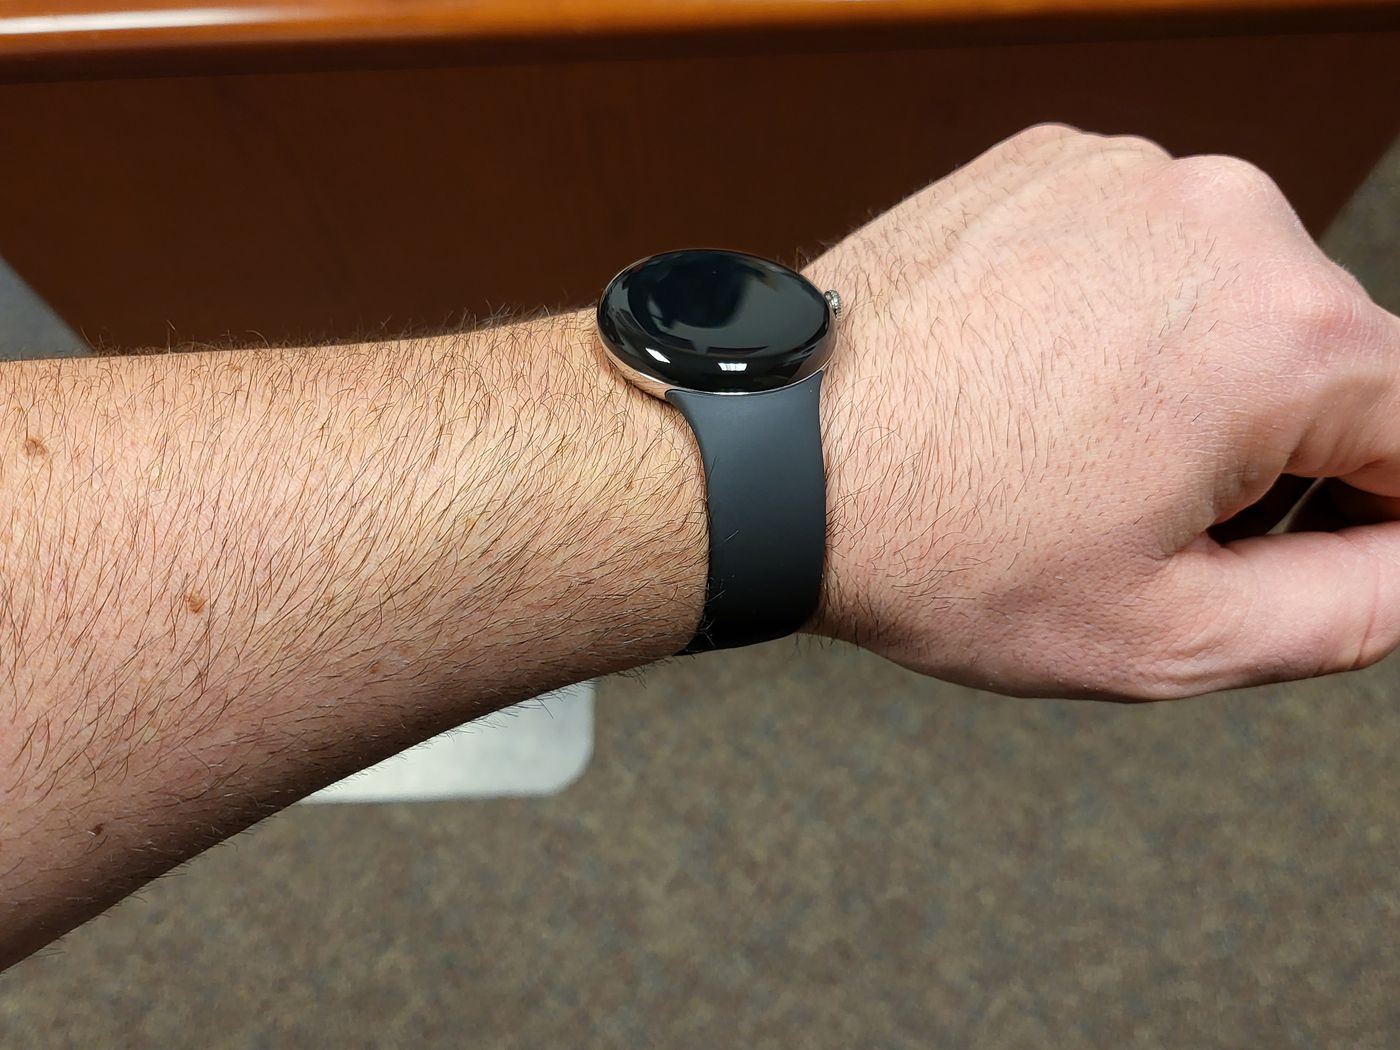 New leaked images claim to show Google's Pixel Watch on a wrist 